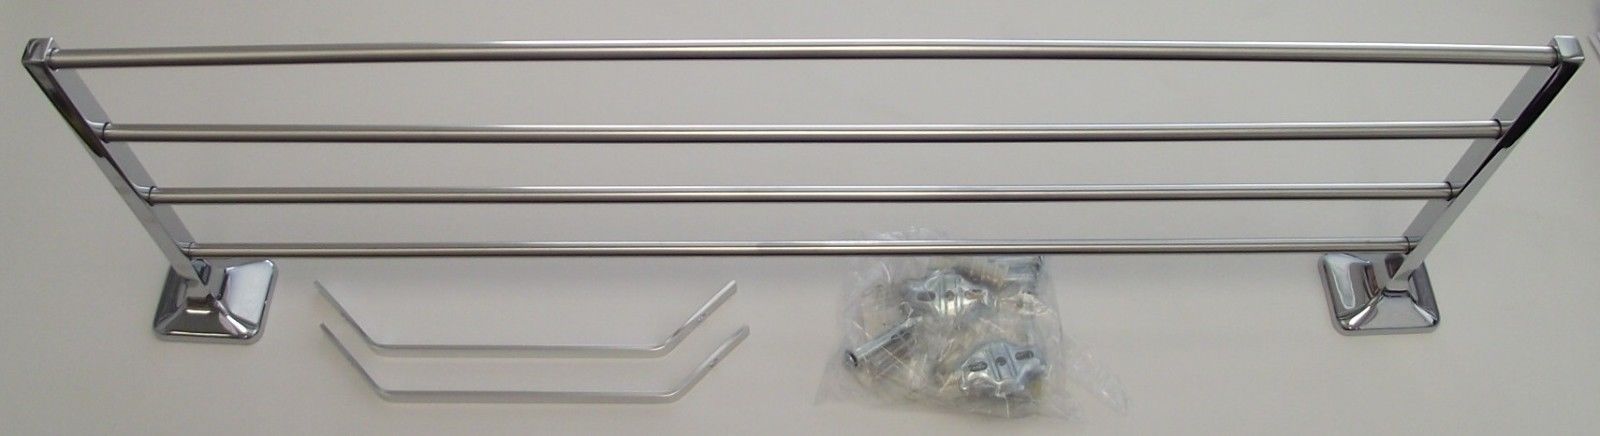 Taymor Towel Shelf With Bar With Support Brackets Chrome 01-150024BB